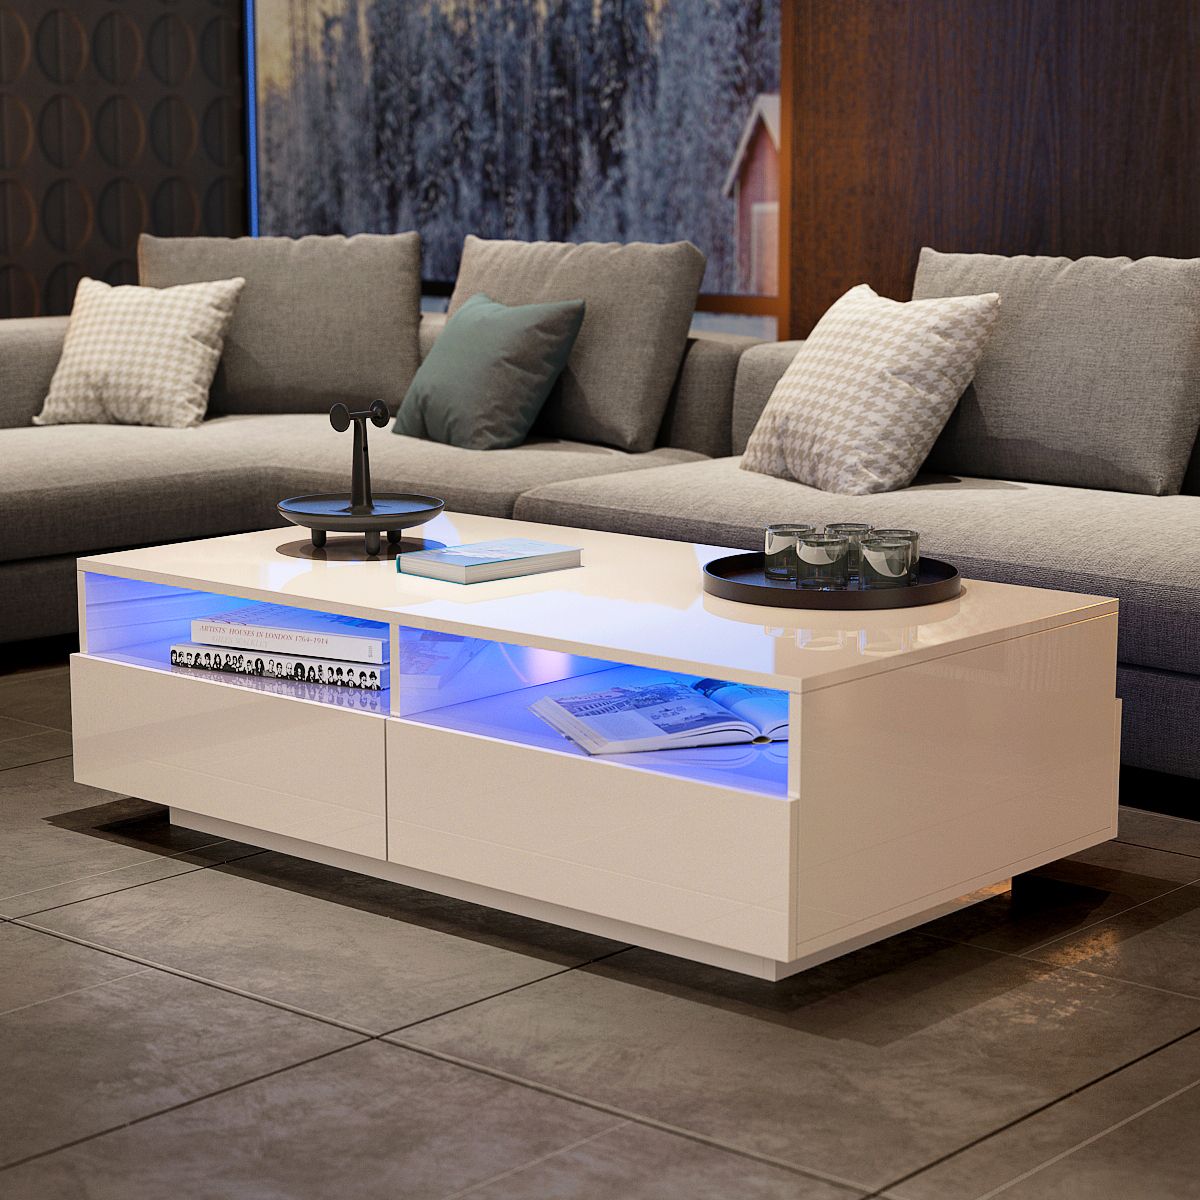 White High Gloss Coffee Table With Led Lights : High Gloss White Coffee Intended For Coffee Tables With Led Lights (View 14 of 15)